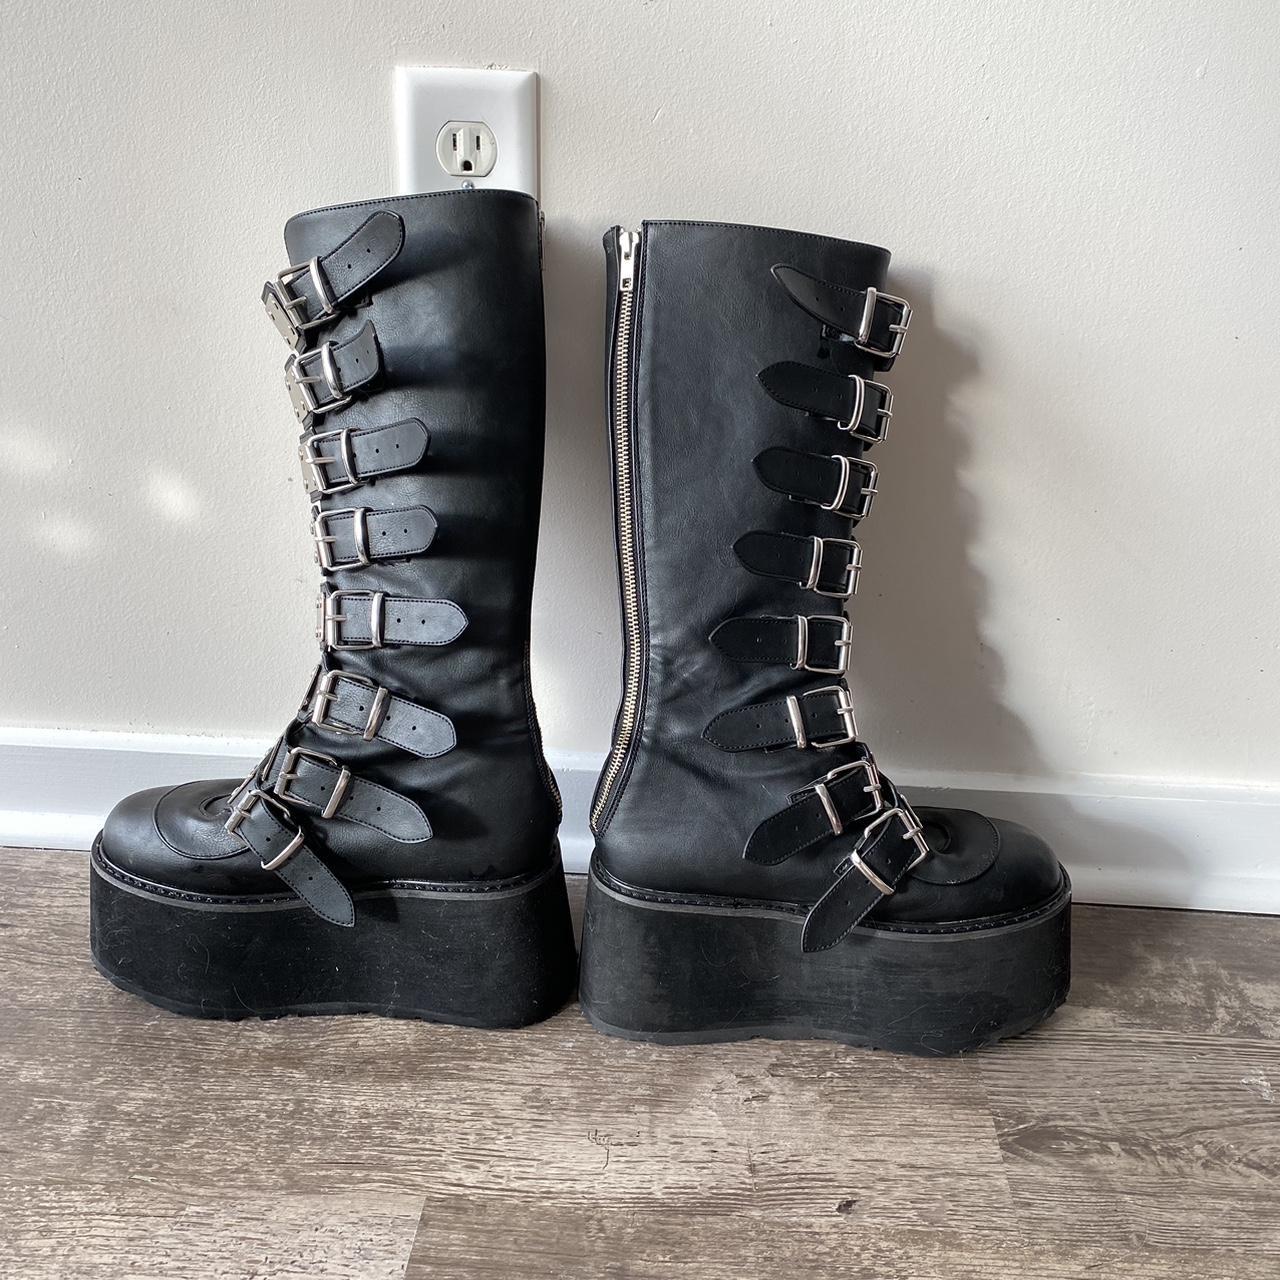 Demonia Women's Silver and Black Boots (3)